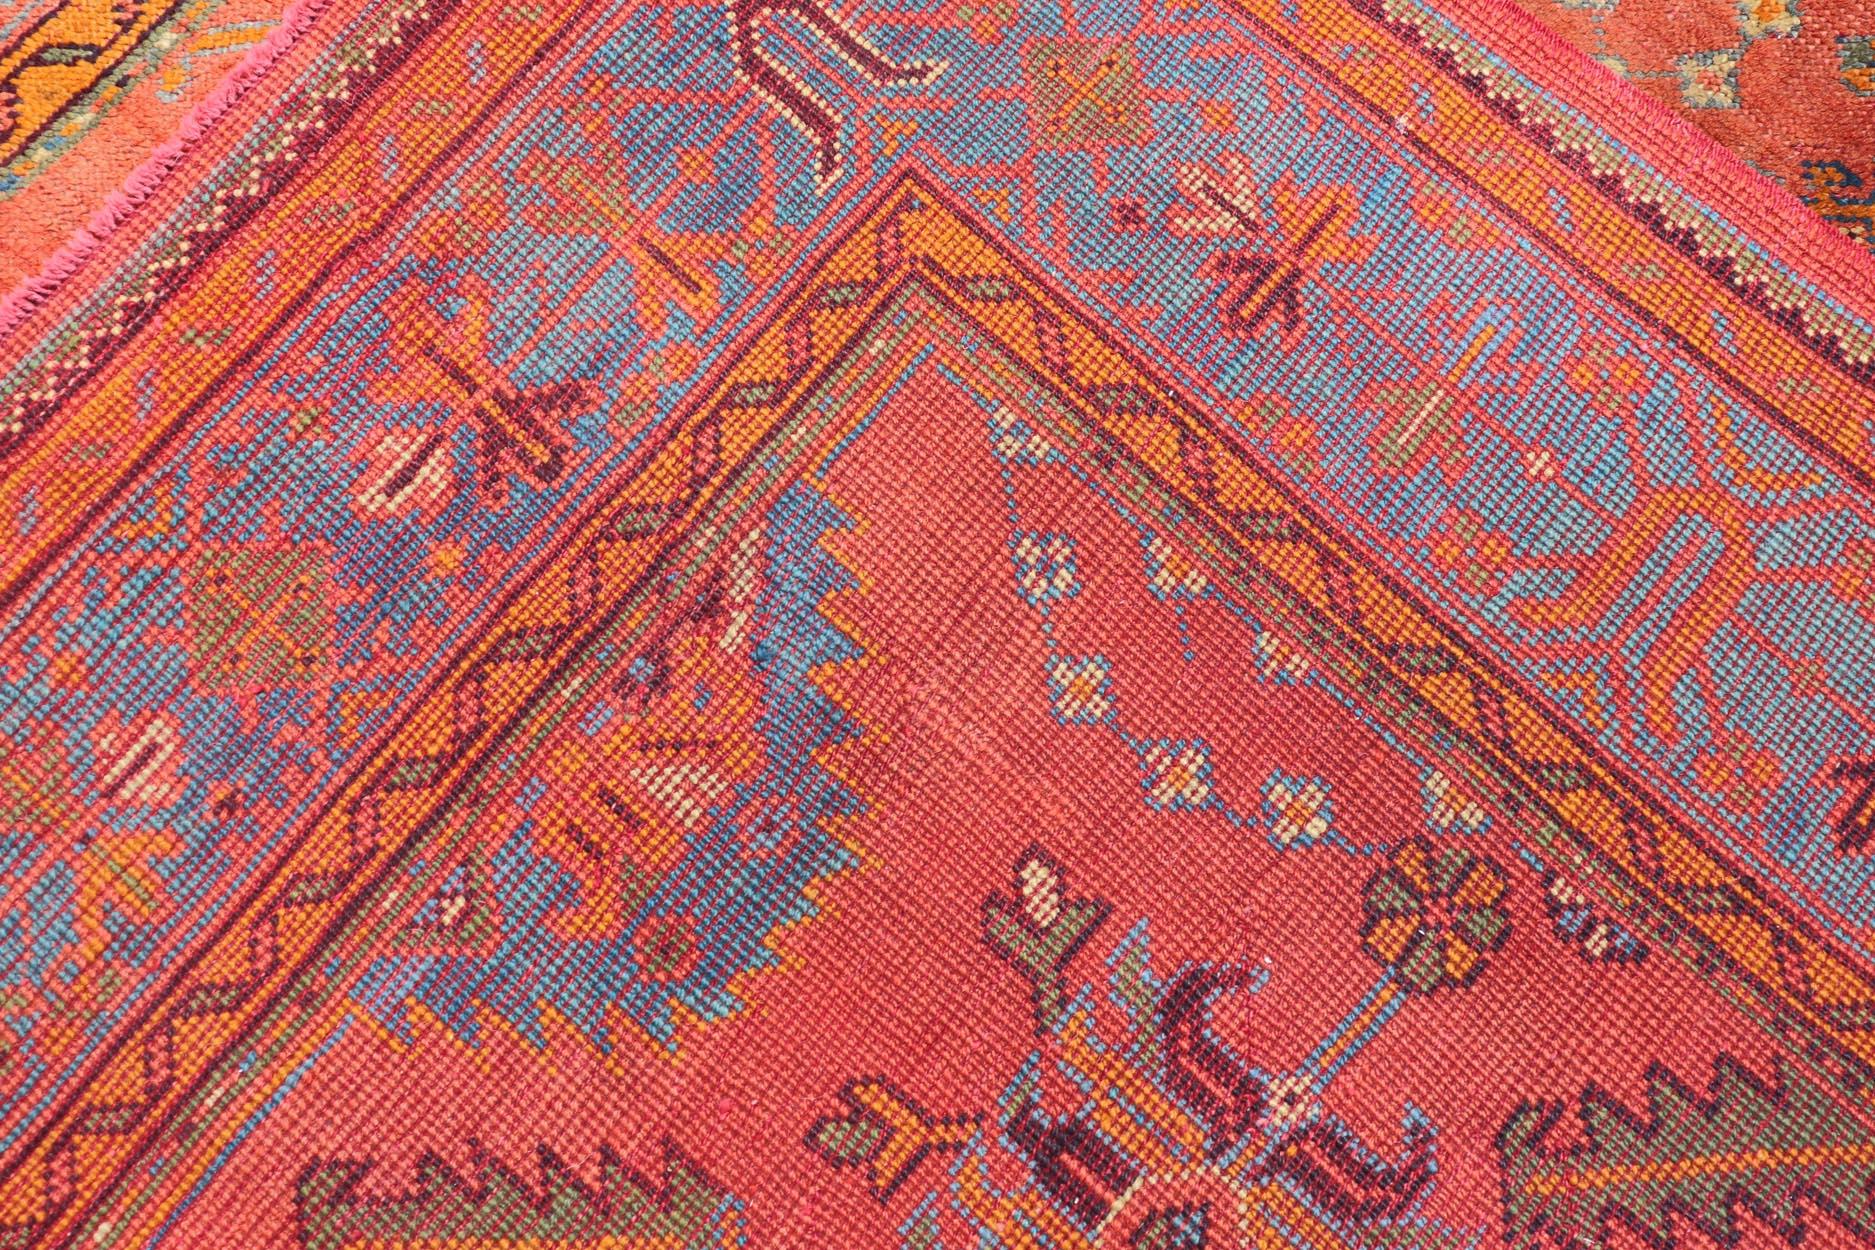 Antique Turkish Oushak Colorful Rug With All-Over Design In Salmon and Blue's  For Sale 9